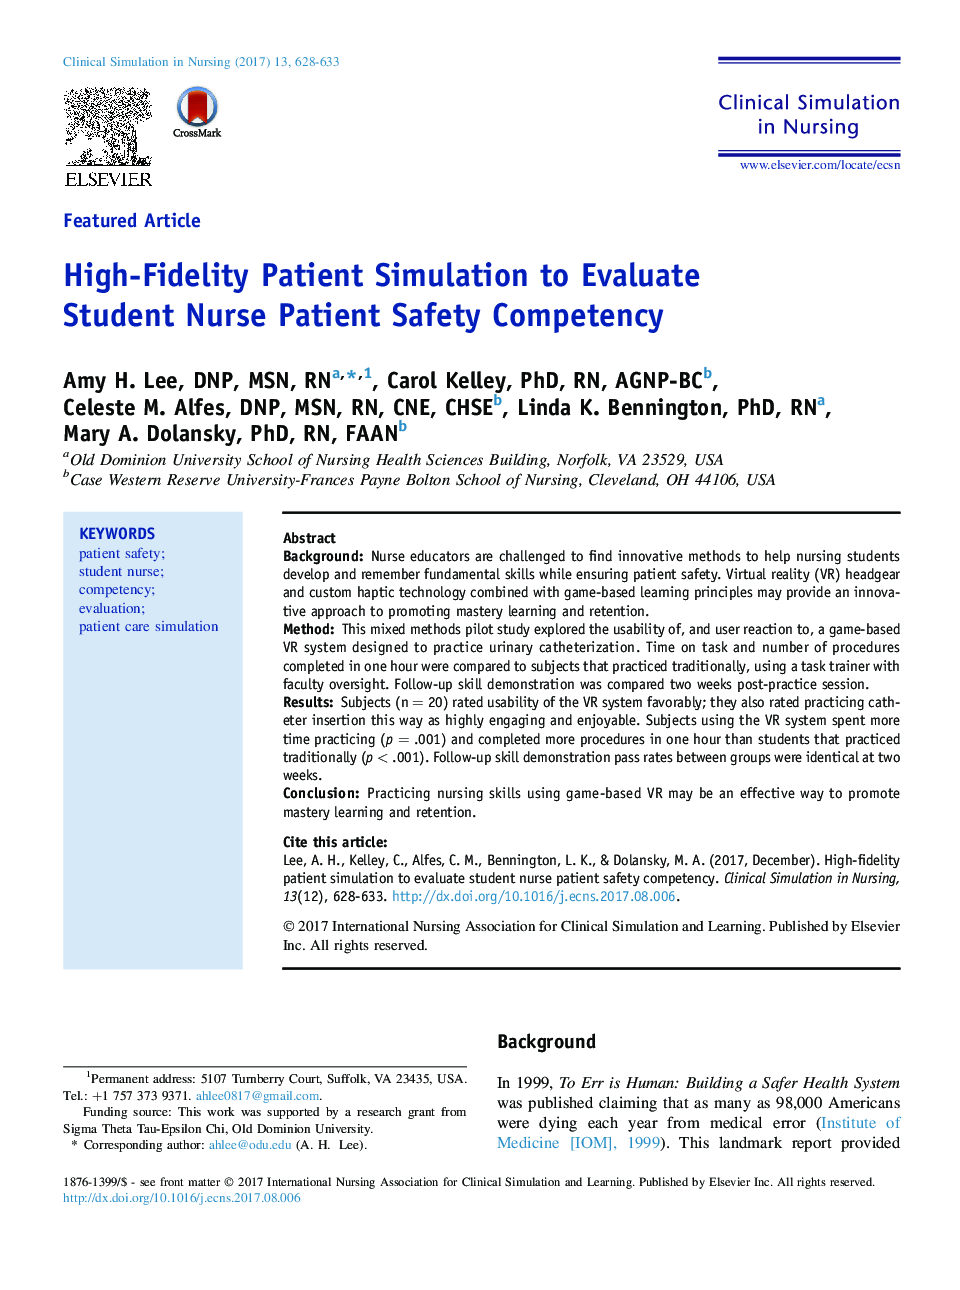 High-Fidelity Patient Simulation to Evaluate Student Nurse Patient Safety Competency